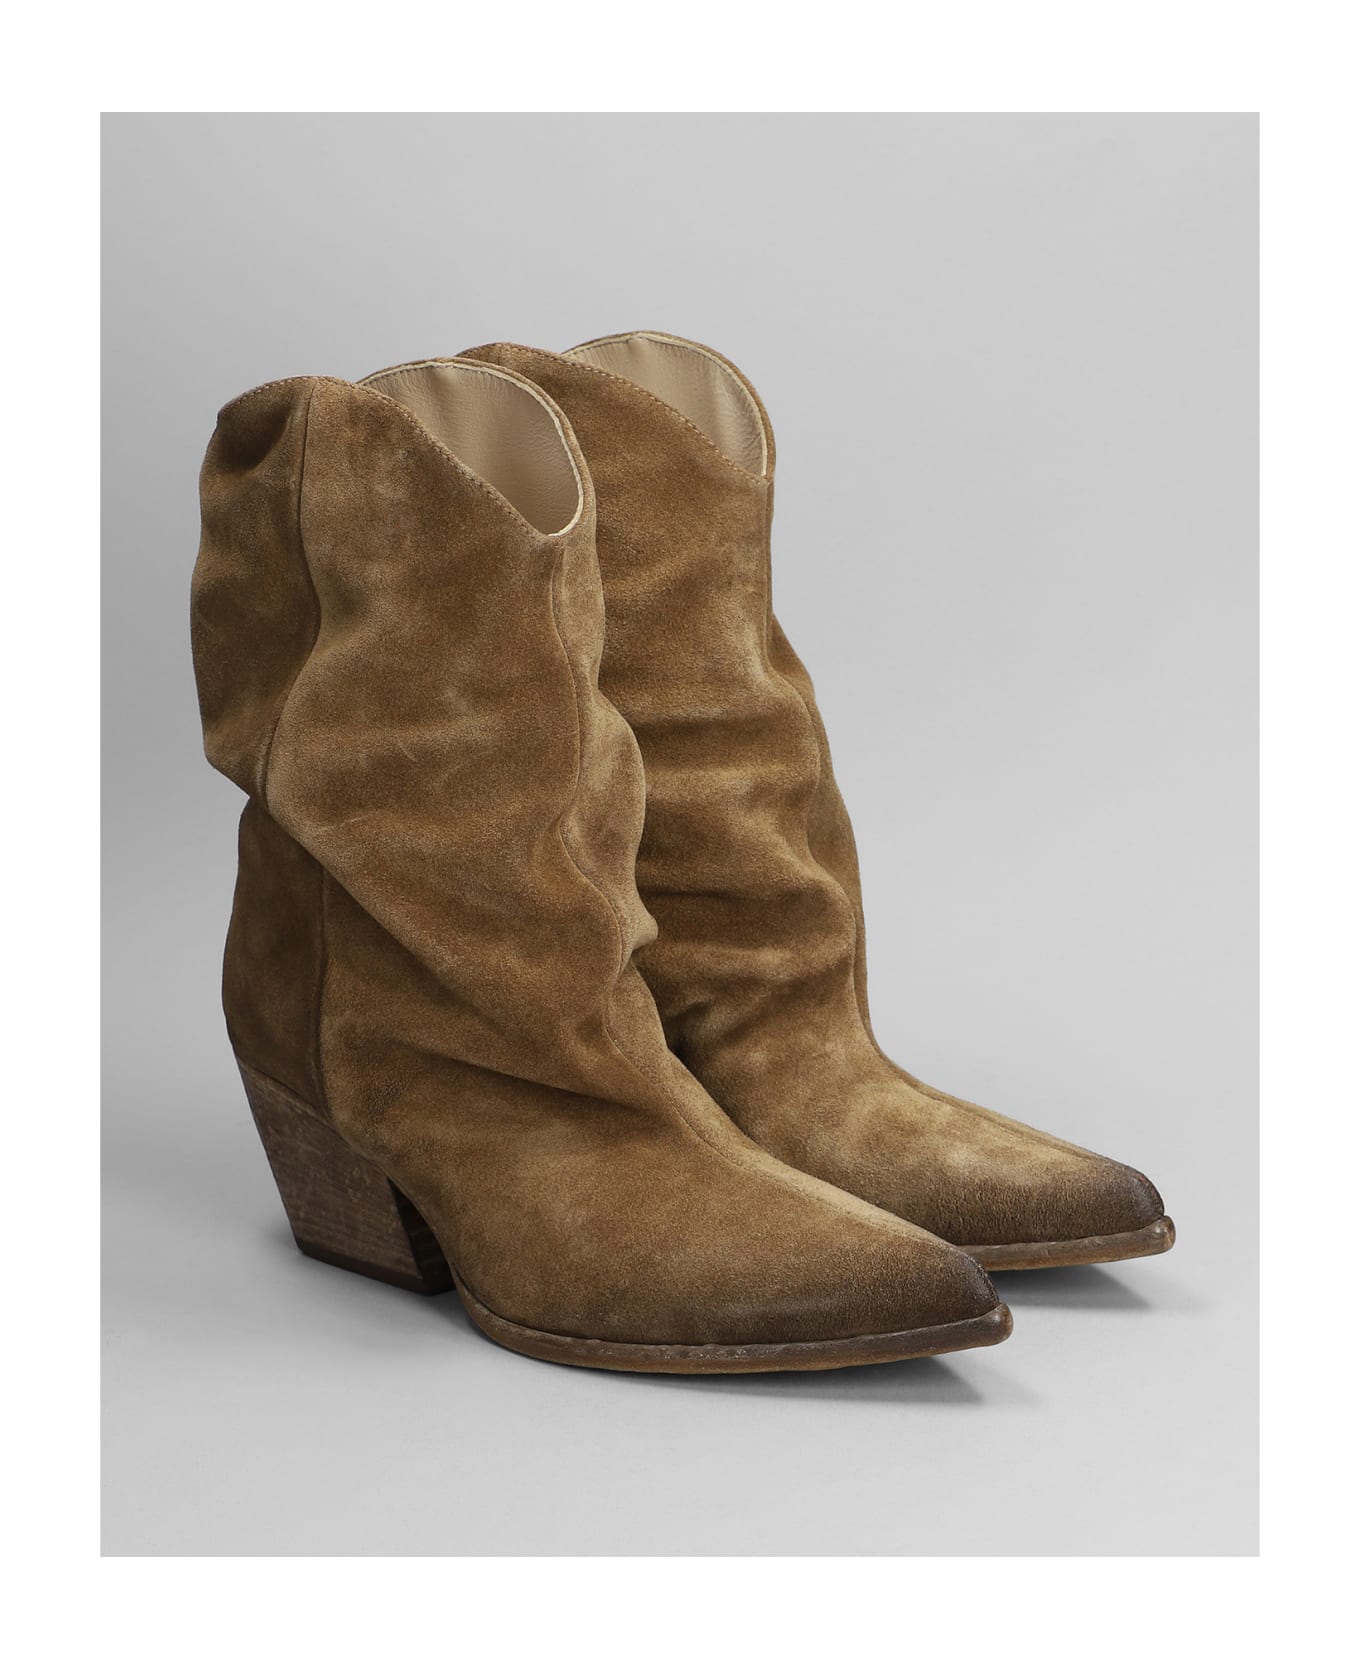 Elena Iachi Low Heels Ankle Boots In Camel Suede - Camel